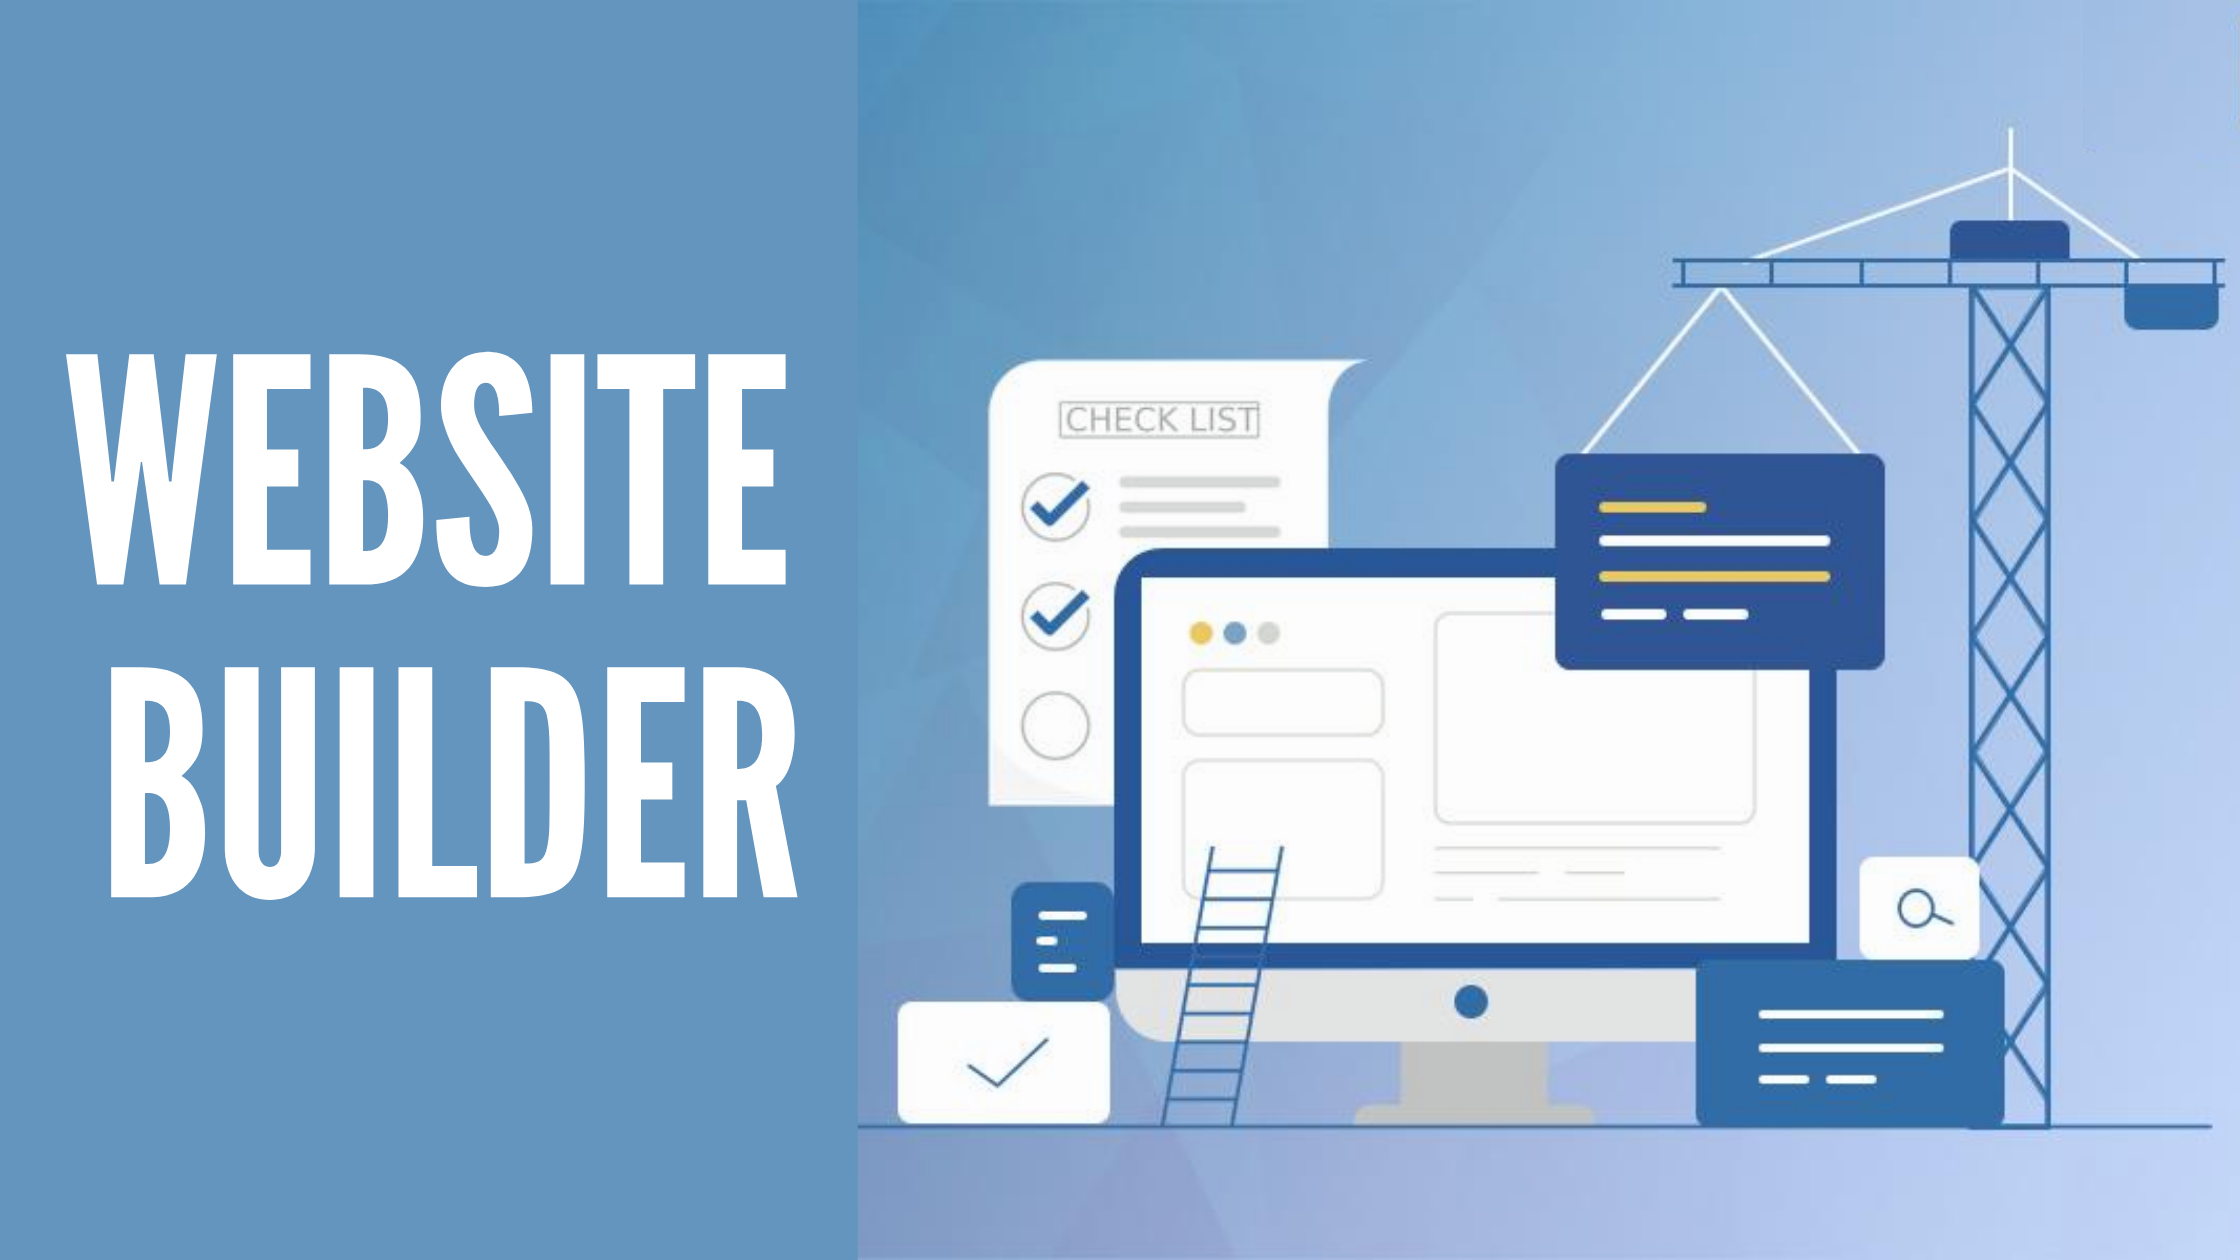 Is It Worthy To Create A Business Portfolio Using The Website Builder?